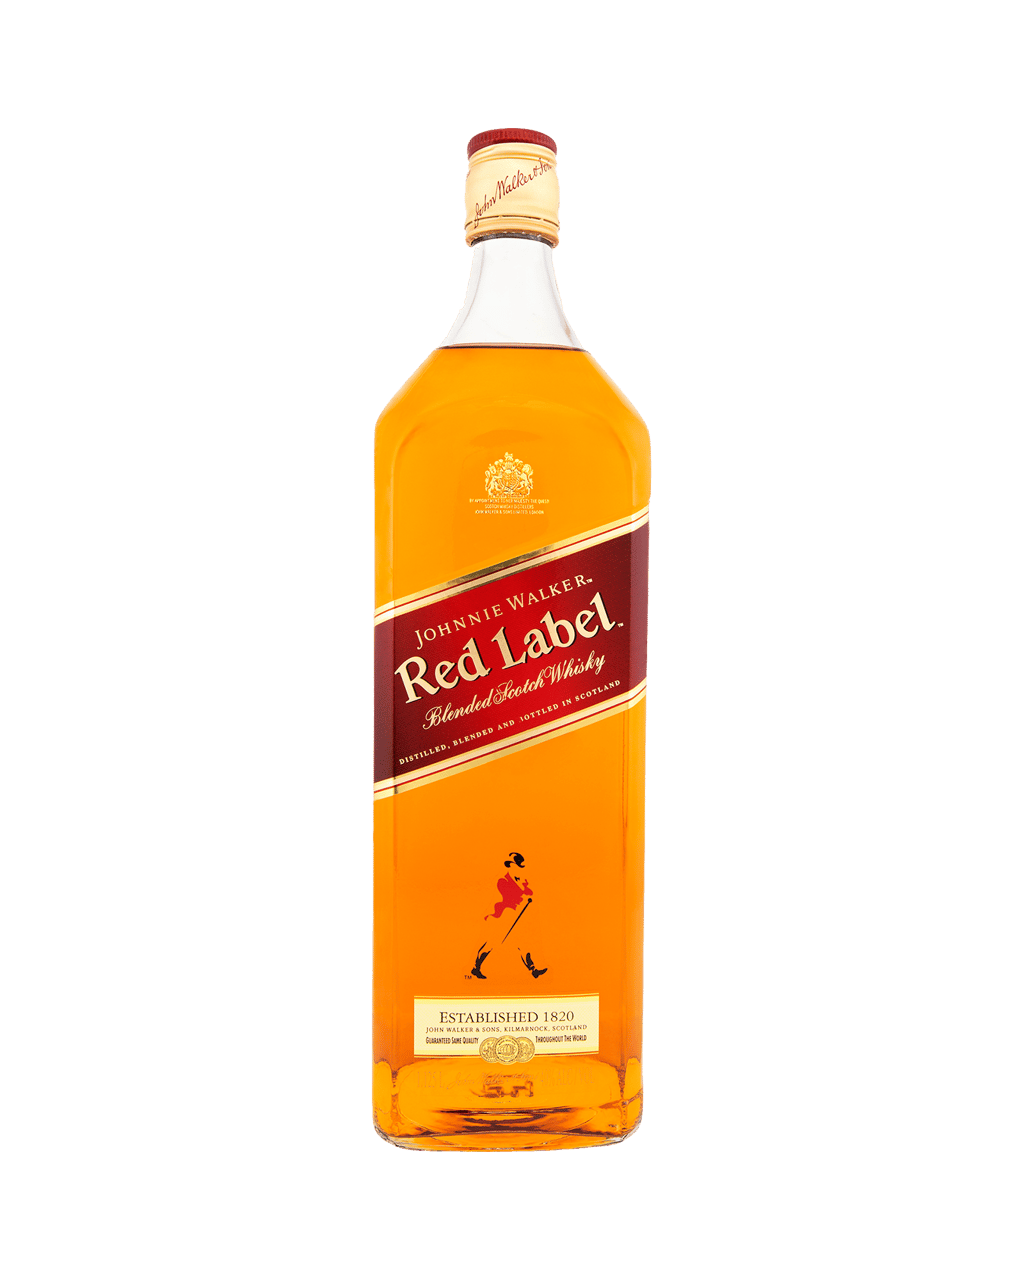 Porters five forces to launch johnnie walker double blacl